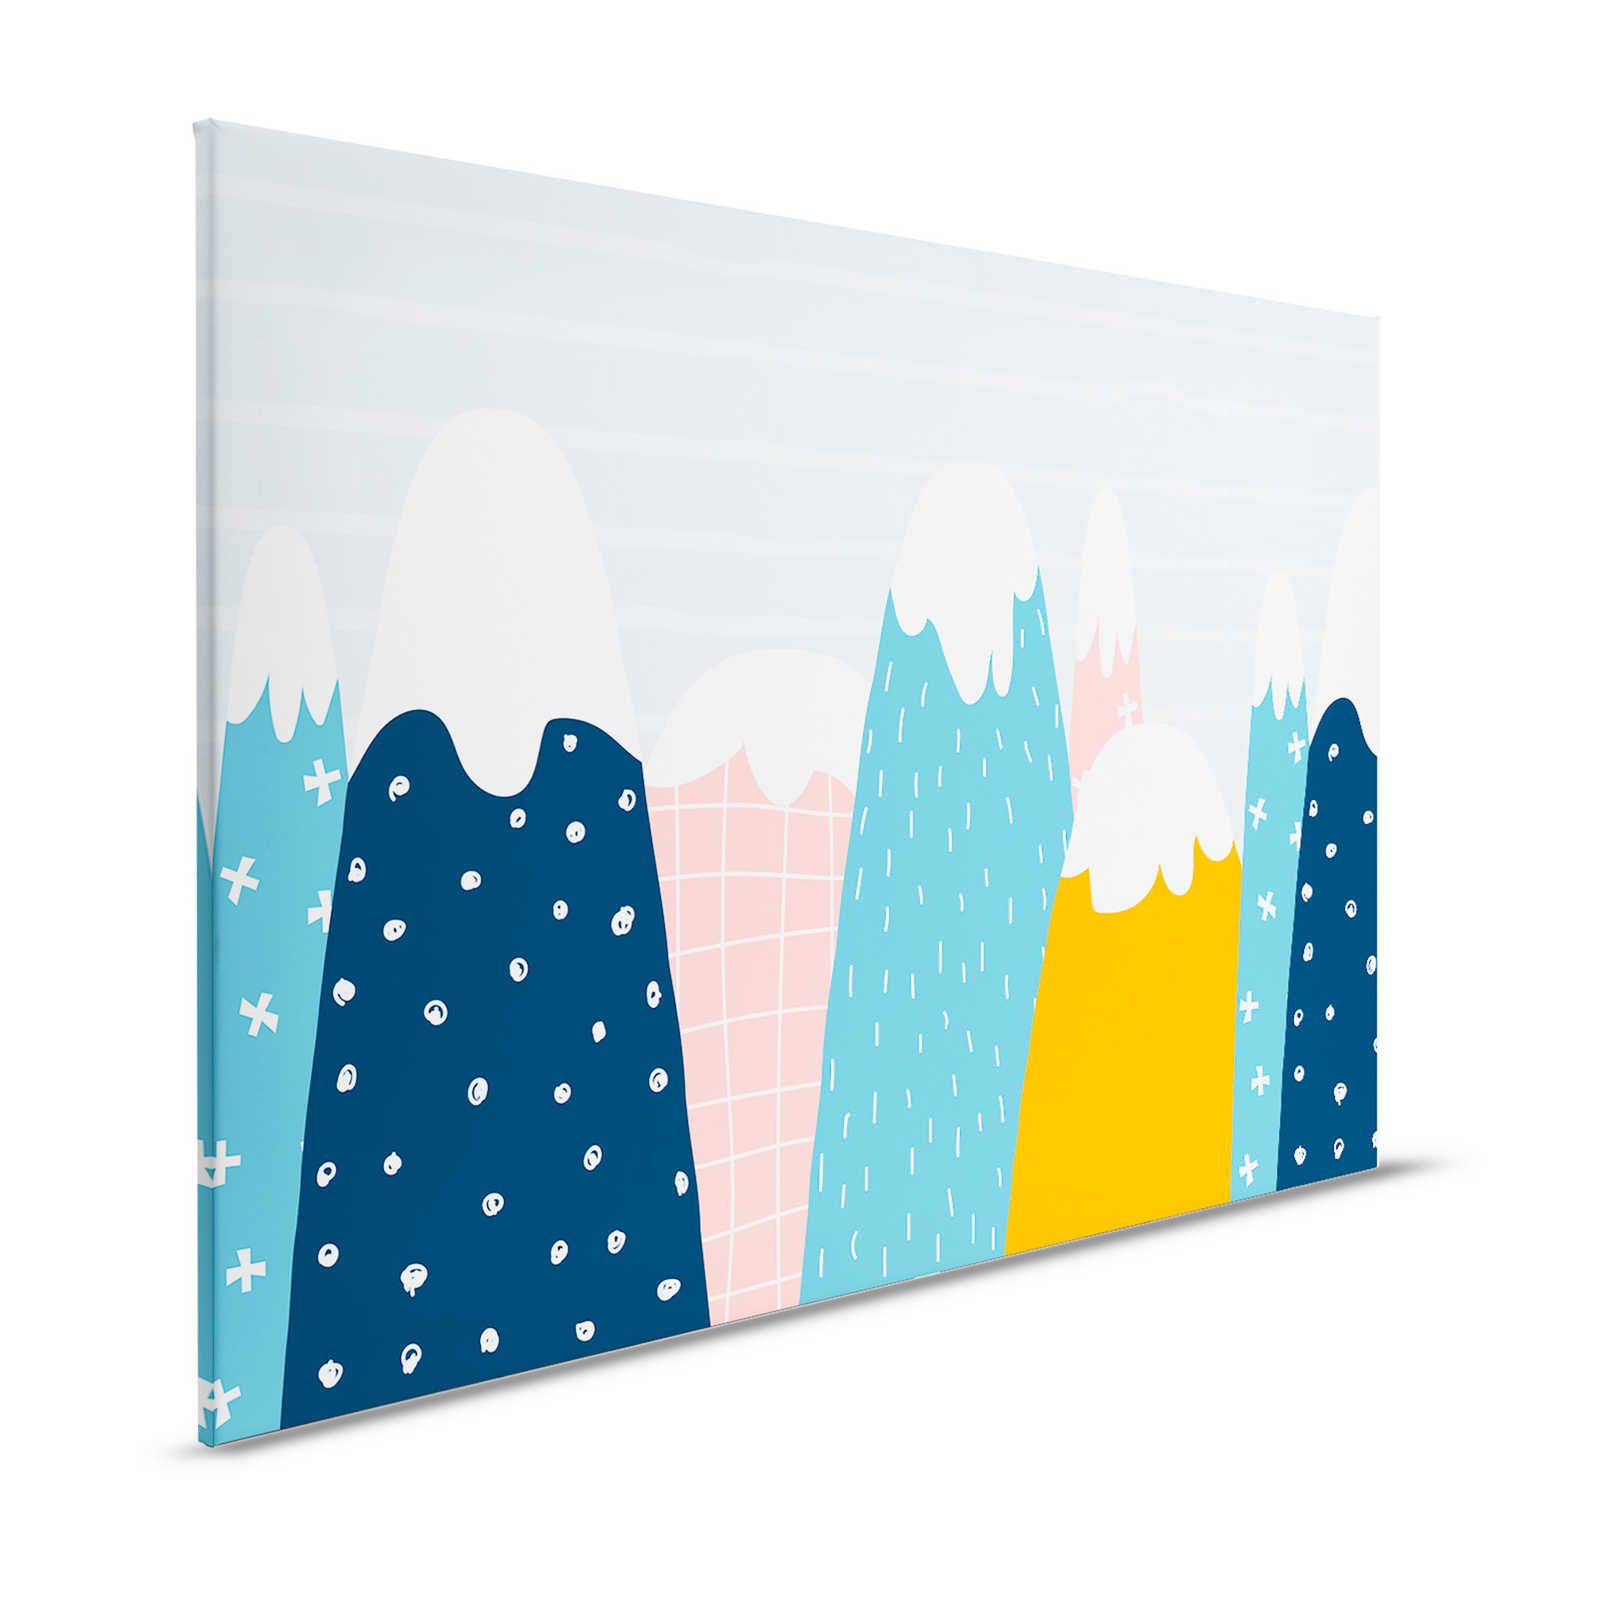 Canvas with snowy hills in painted style - 120 cm x 80 cm
